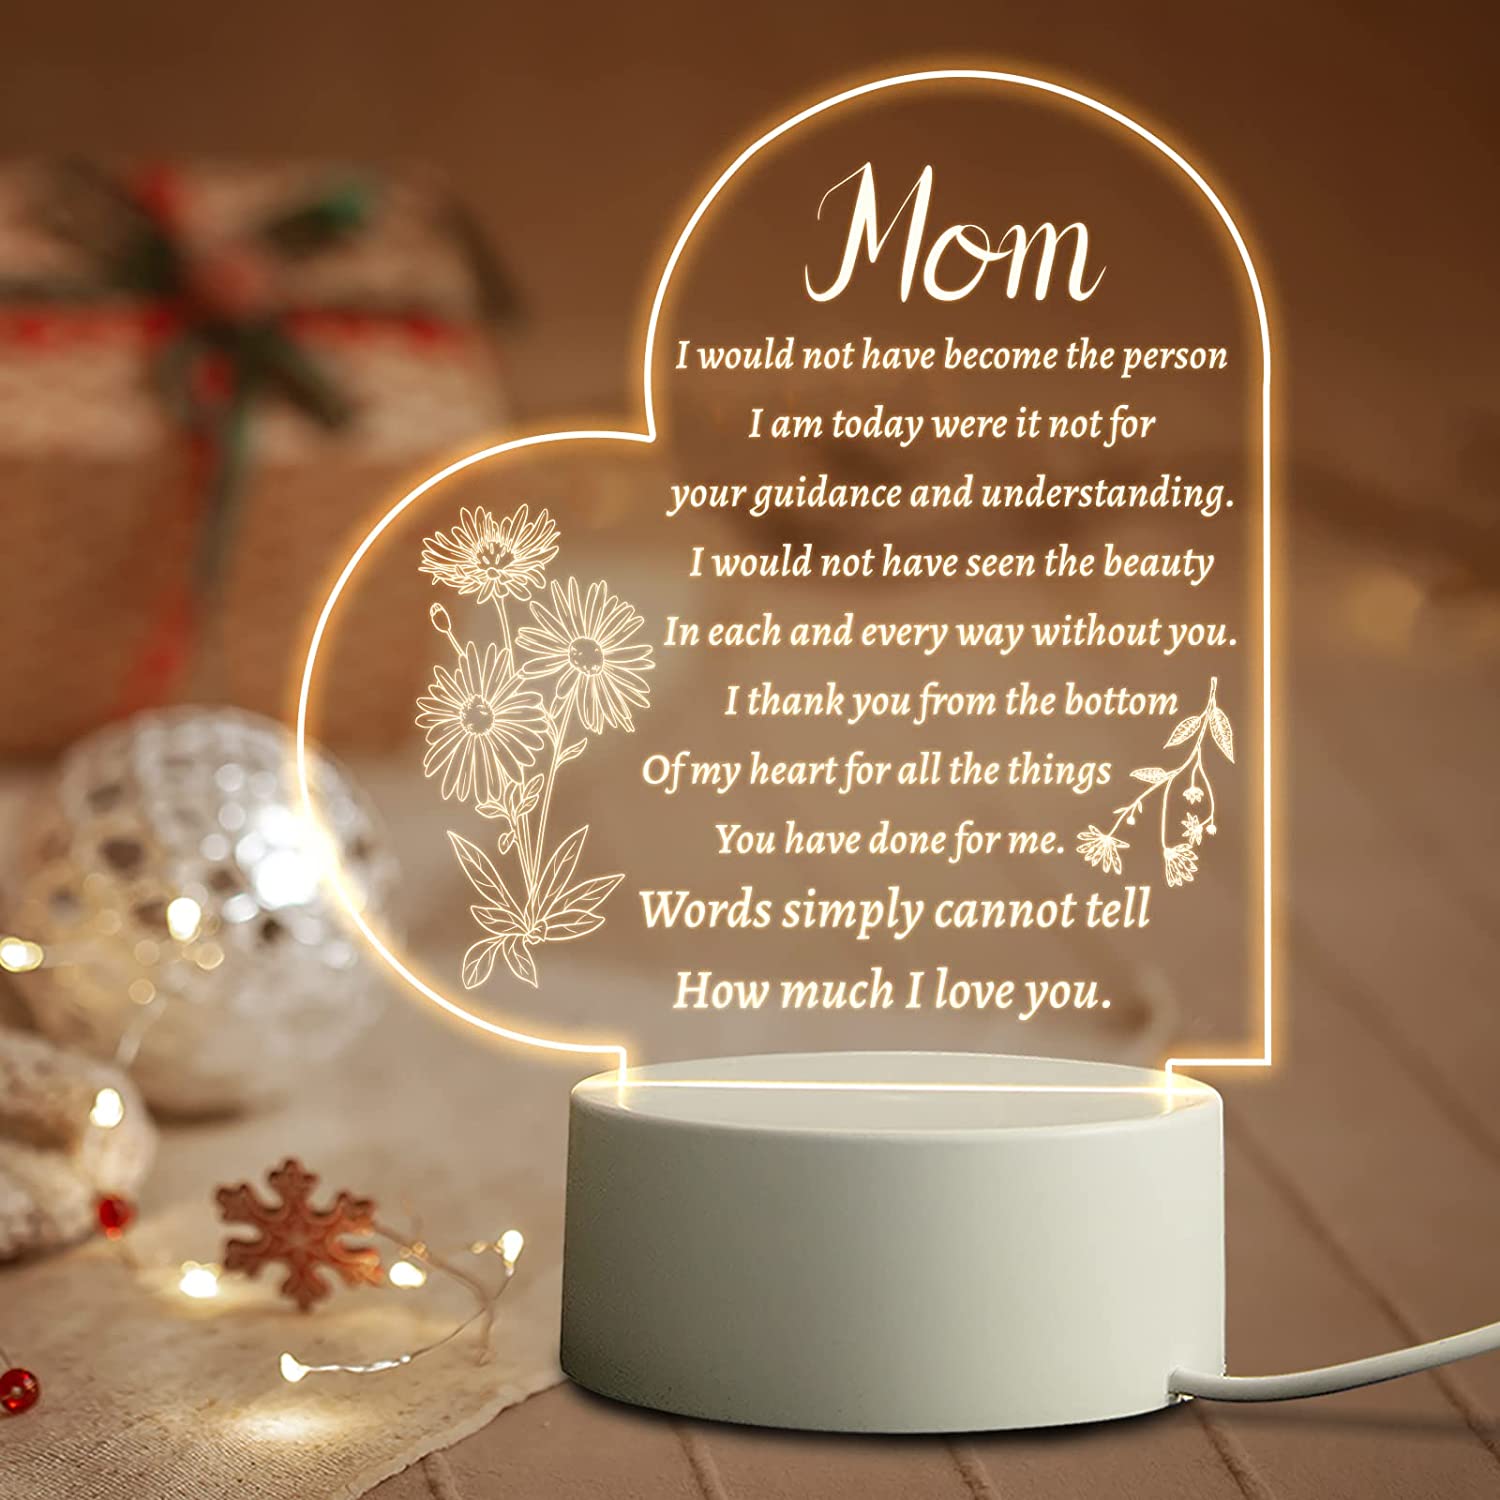 Gifts for Mom from Daughter Son, Best Mom Gifts, Funny Birthday Gifts for  Mom Mother Women, Mothers Day Gifts, Thanksgiving Gifts, Christmas Gifts